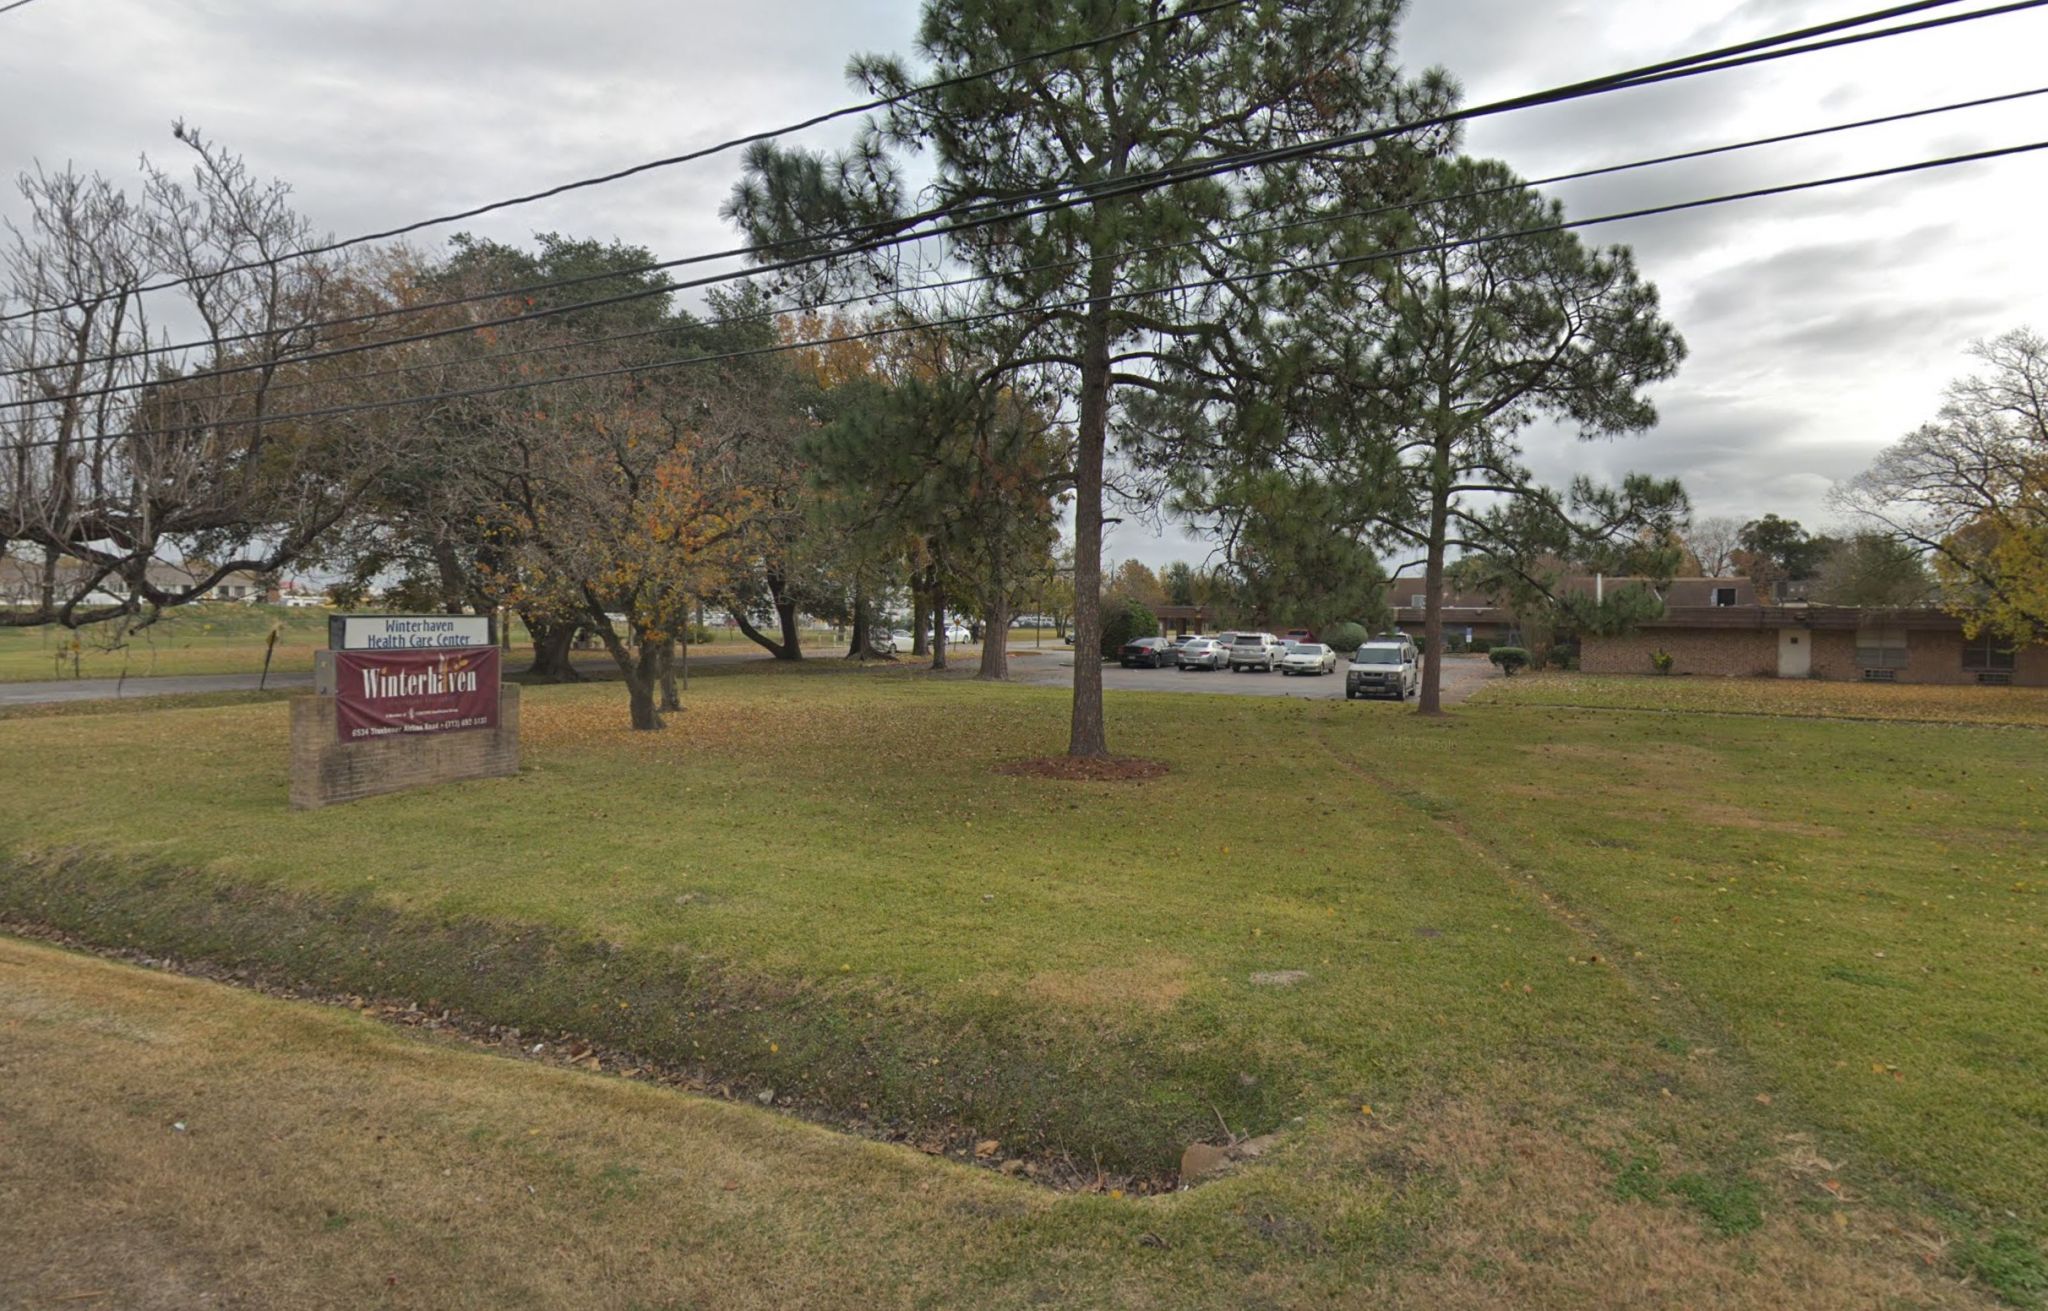 These 12 Houston Area Nursing Homes Have Been Cited For Abuse